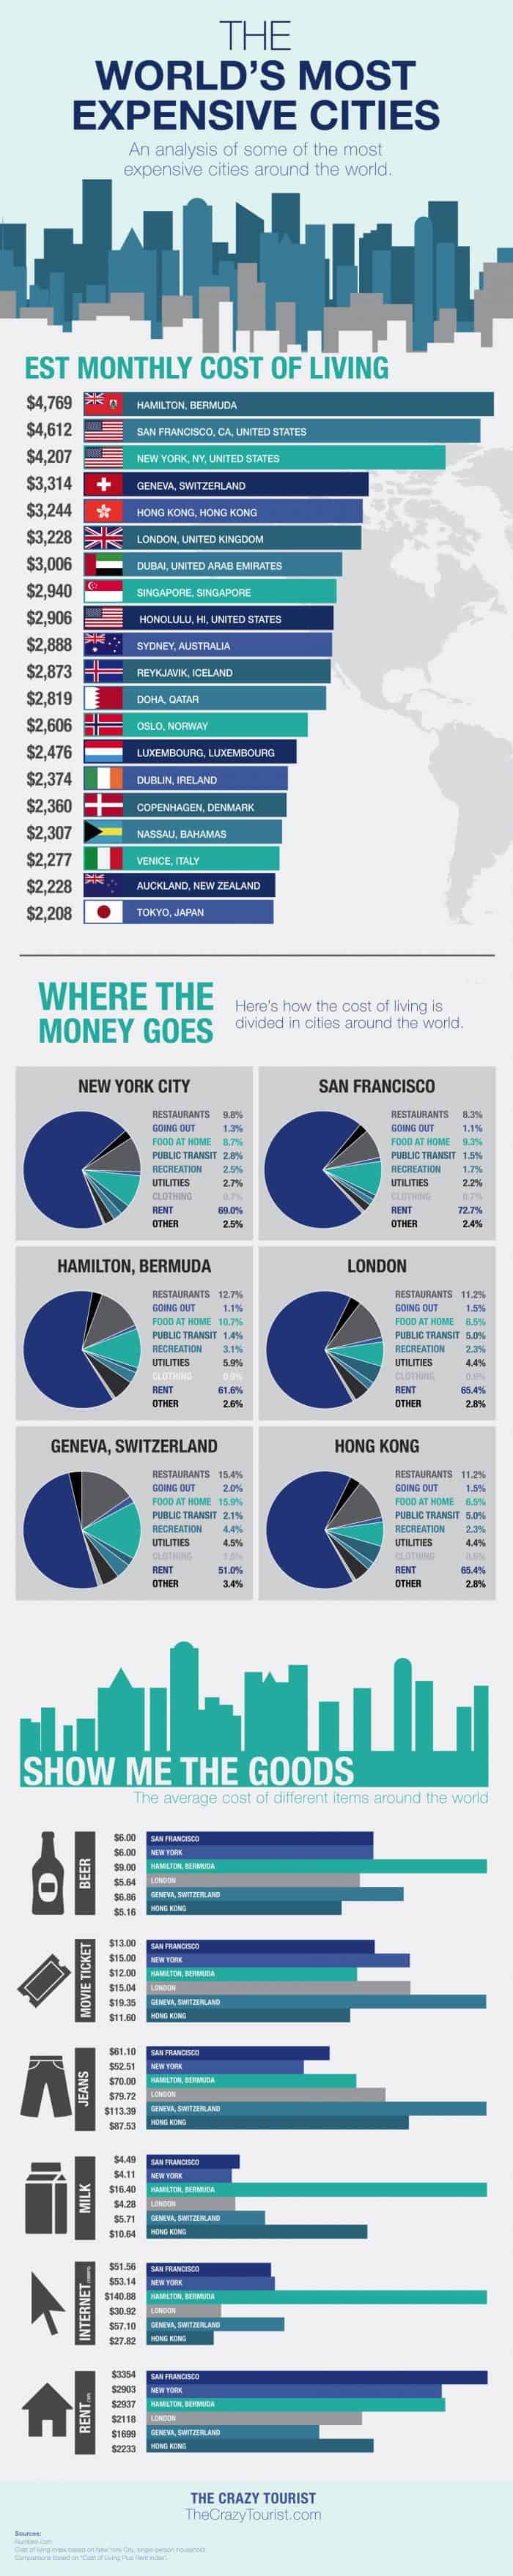 Infographic showing the average cost of living in the most expensive cities in the world